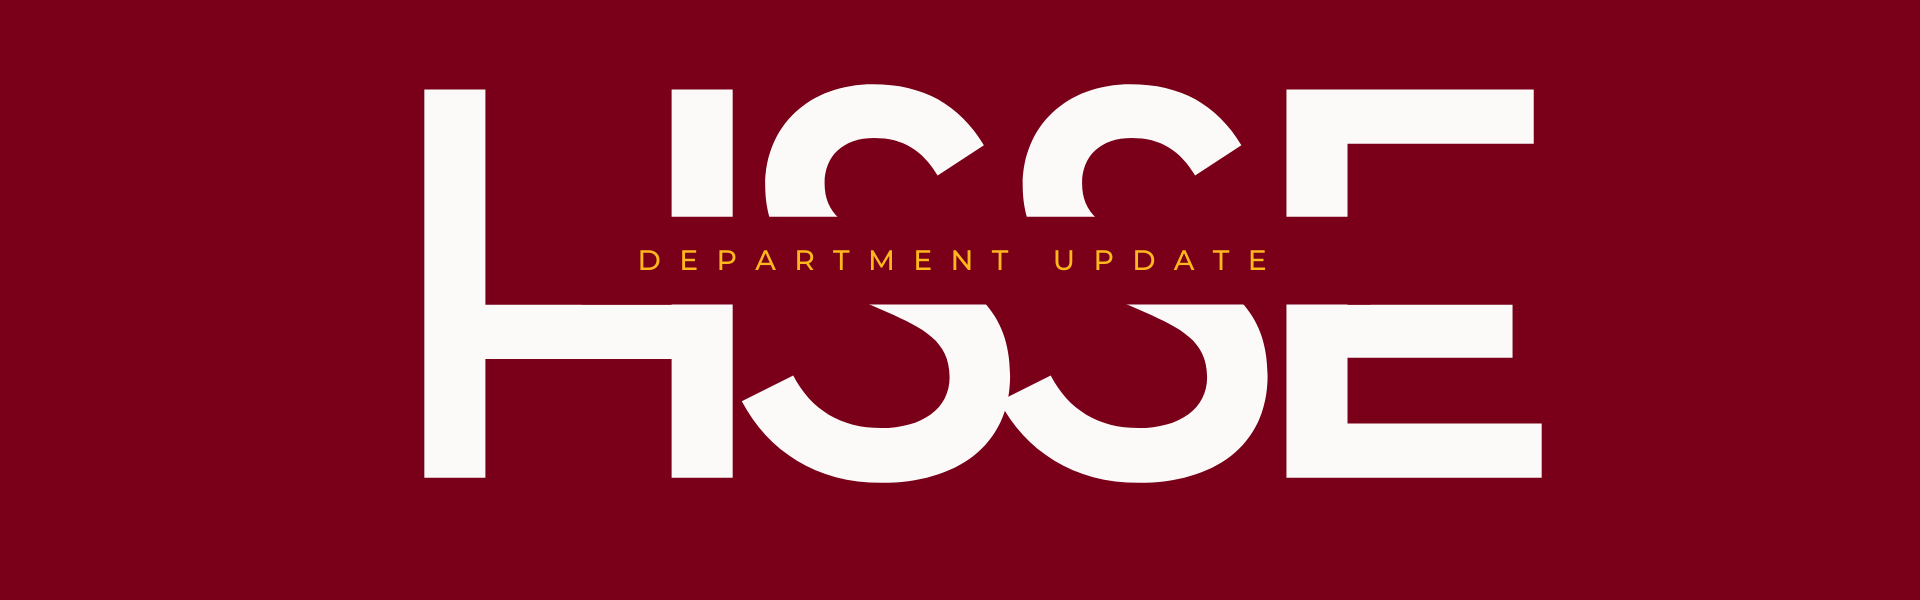 Humanities, Social Sciences and Education Department Update